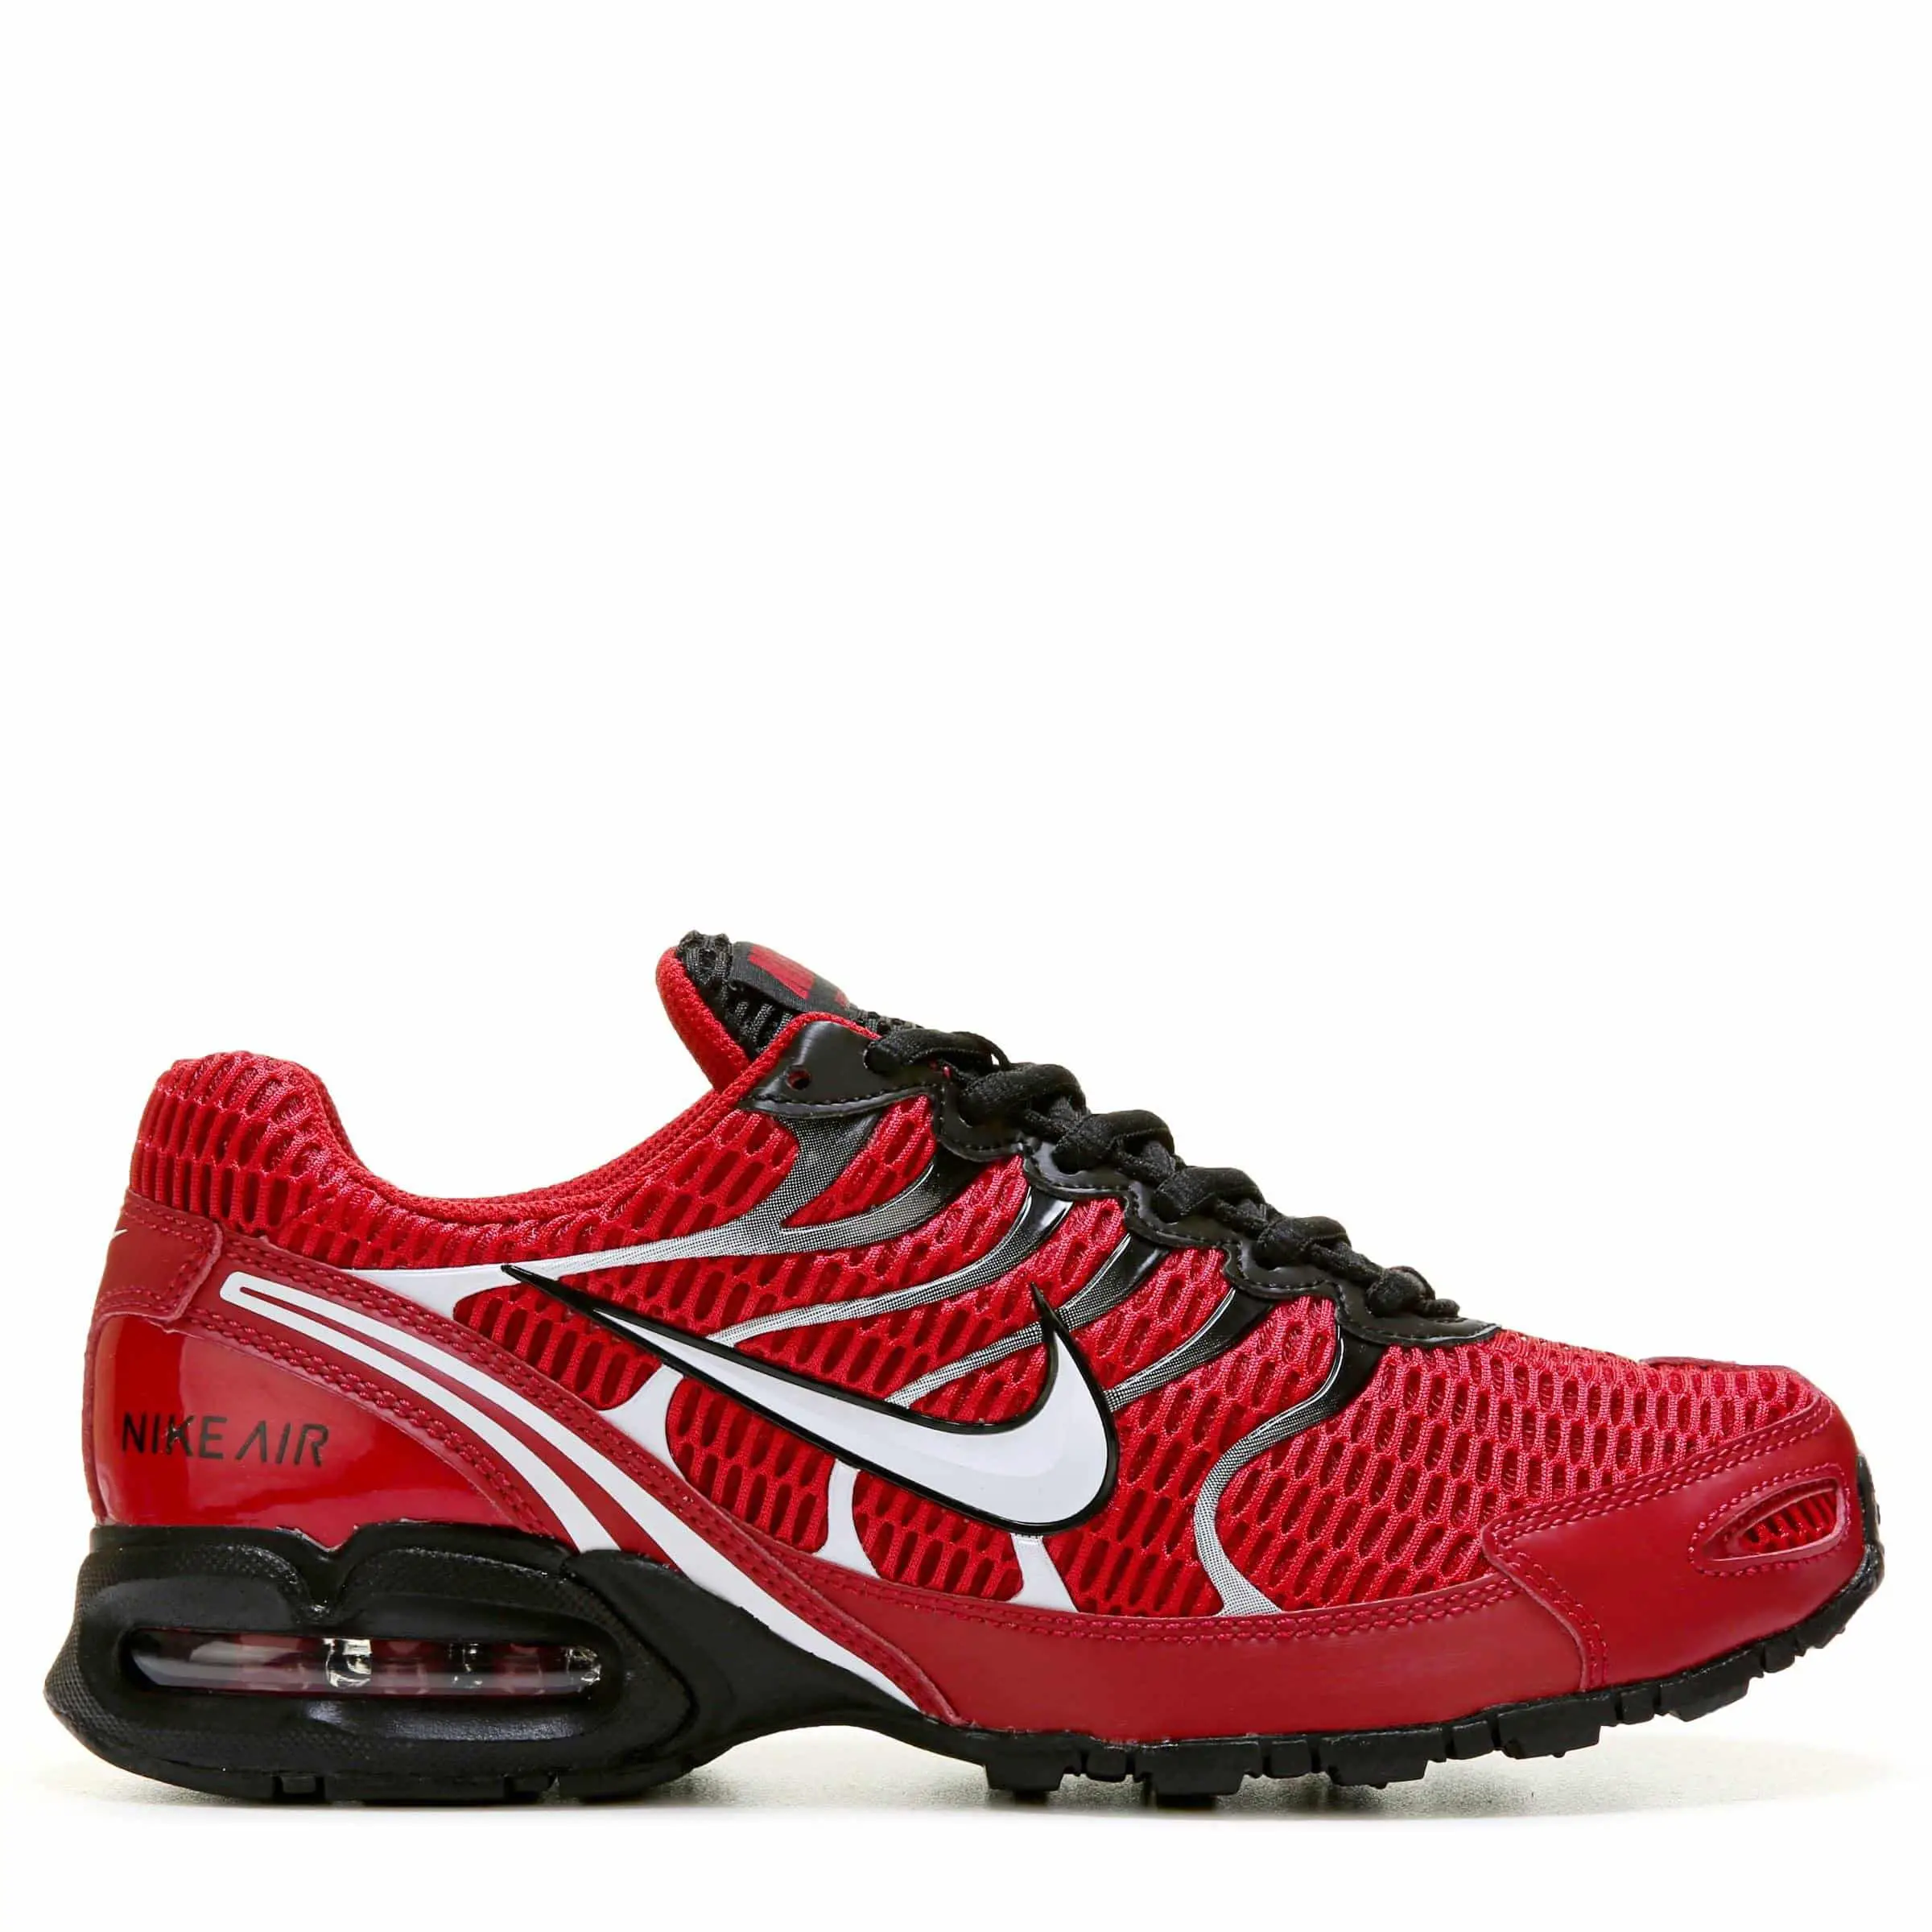 Nike Synthetic Air Max Torch 4 Running Shoes in Red/Black (Red) for Men ...